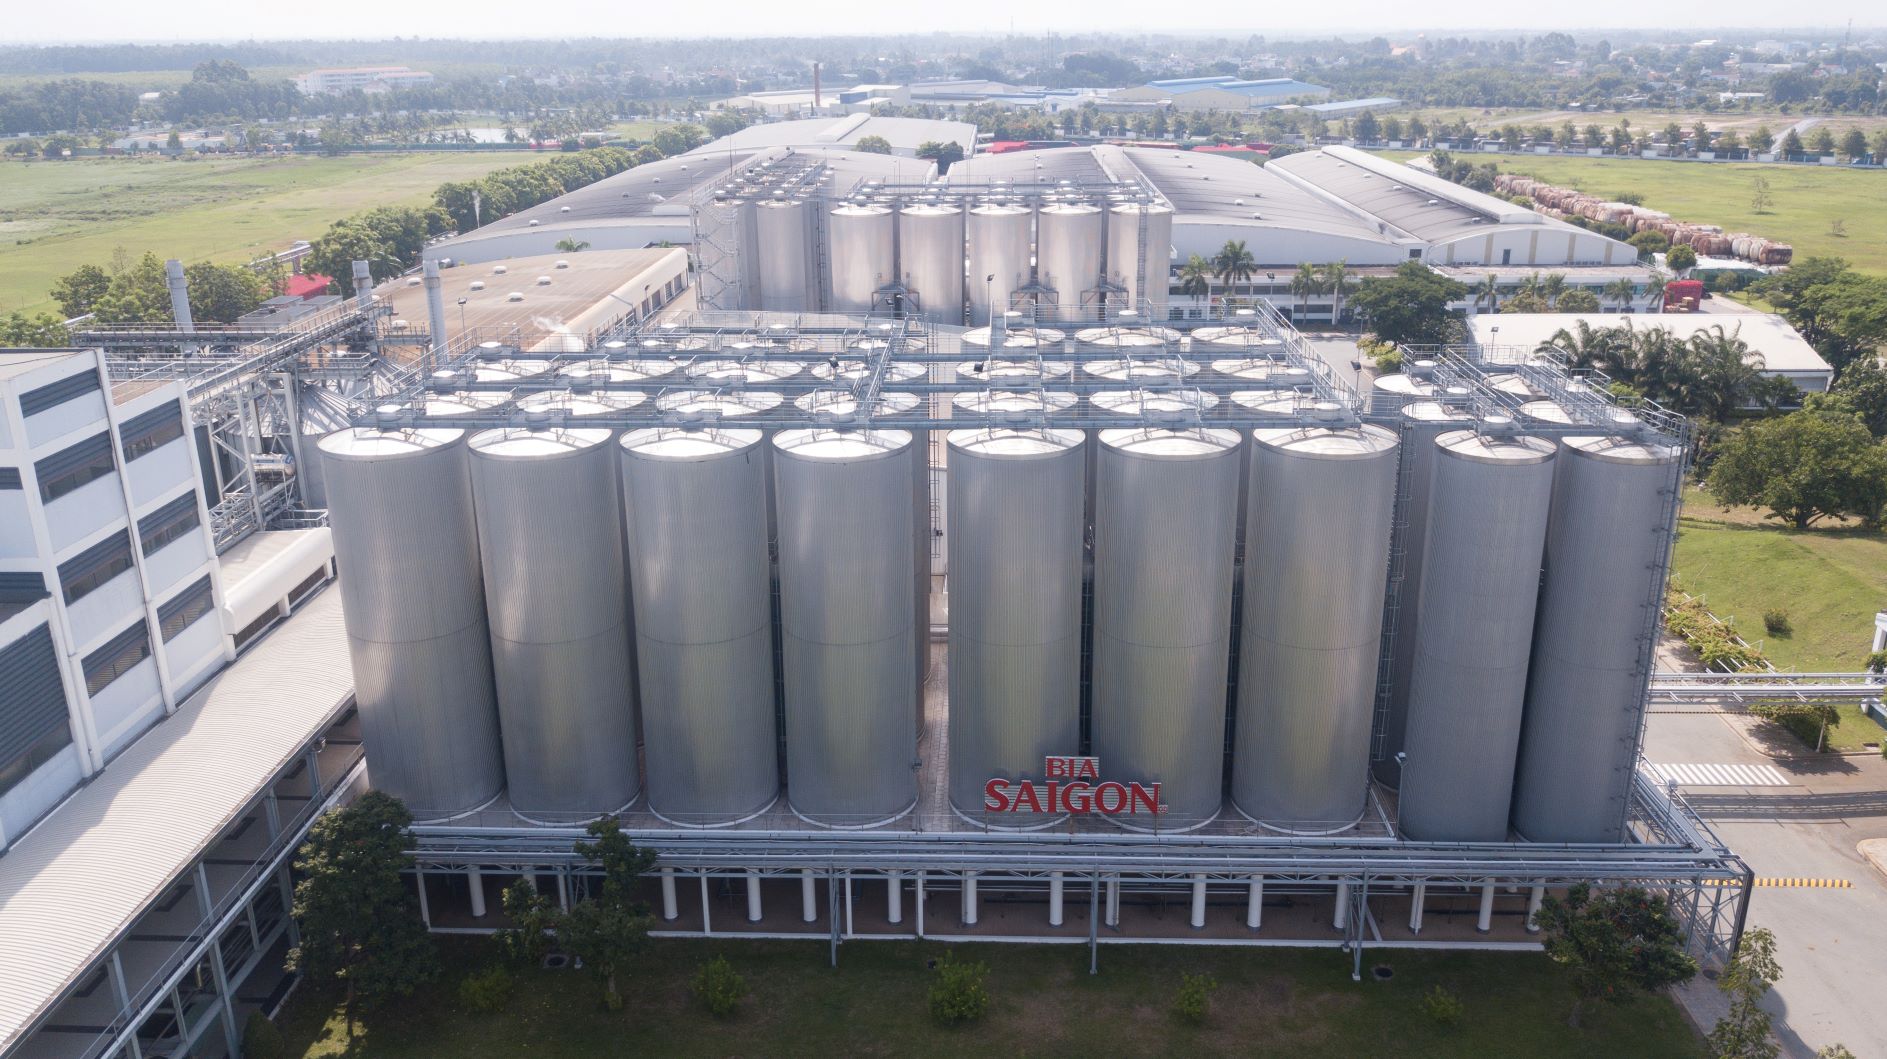 SABECO invests to expand brewing capacity